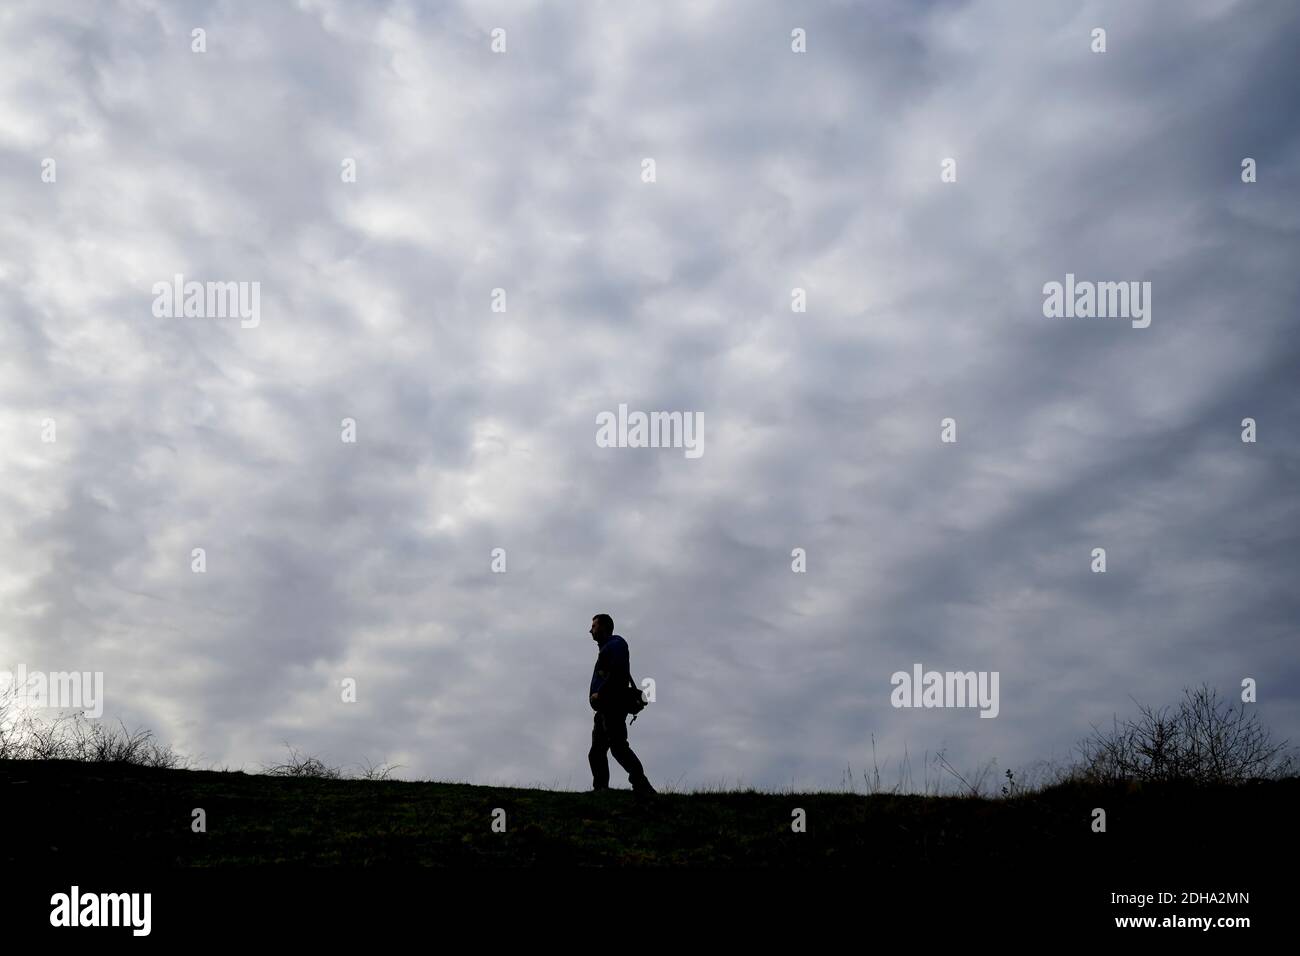 Side view silhouette of a man walking against a dark cloudy background Stock Photo